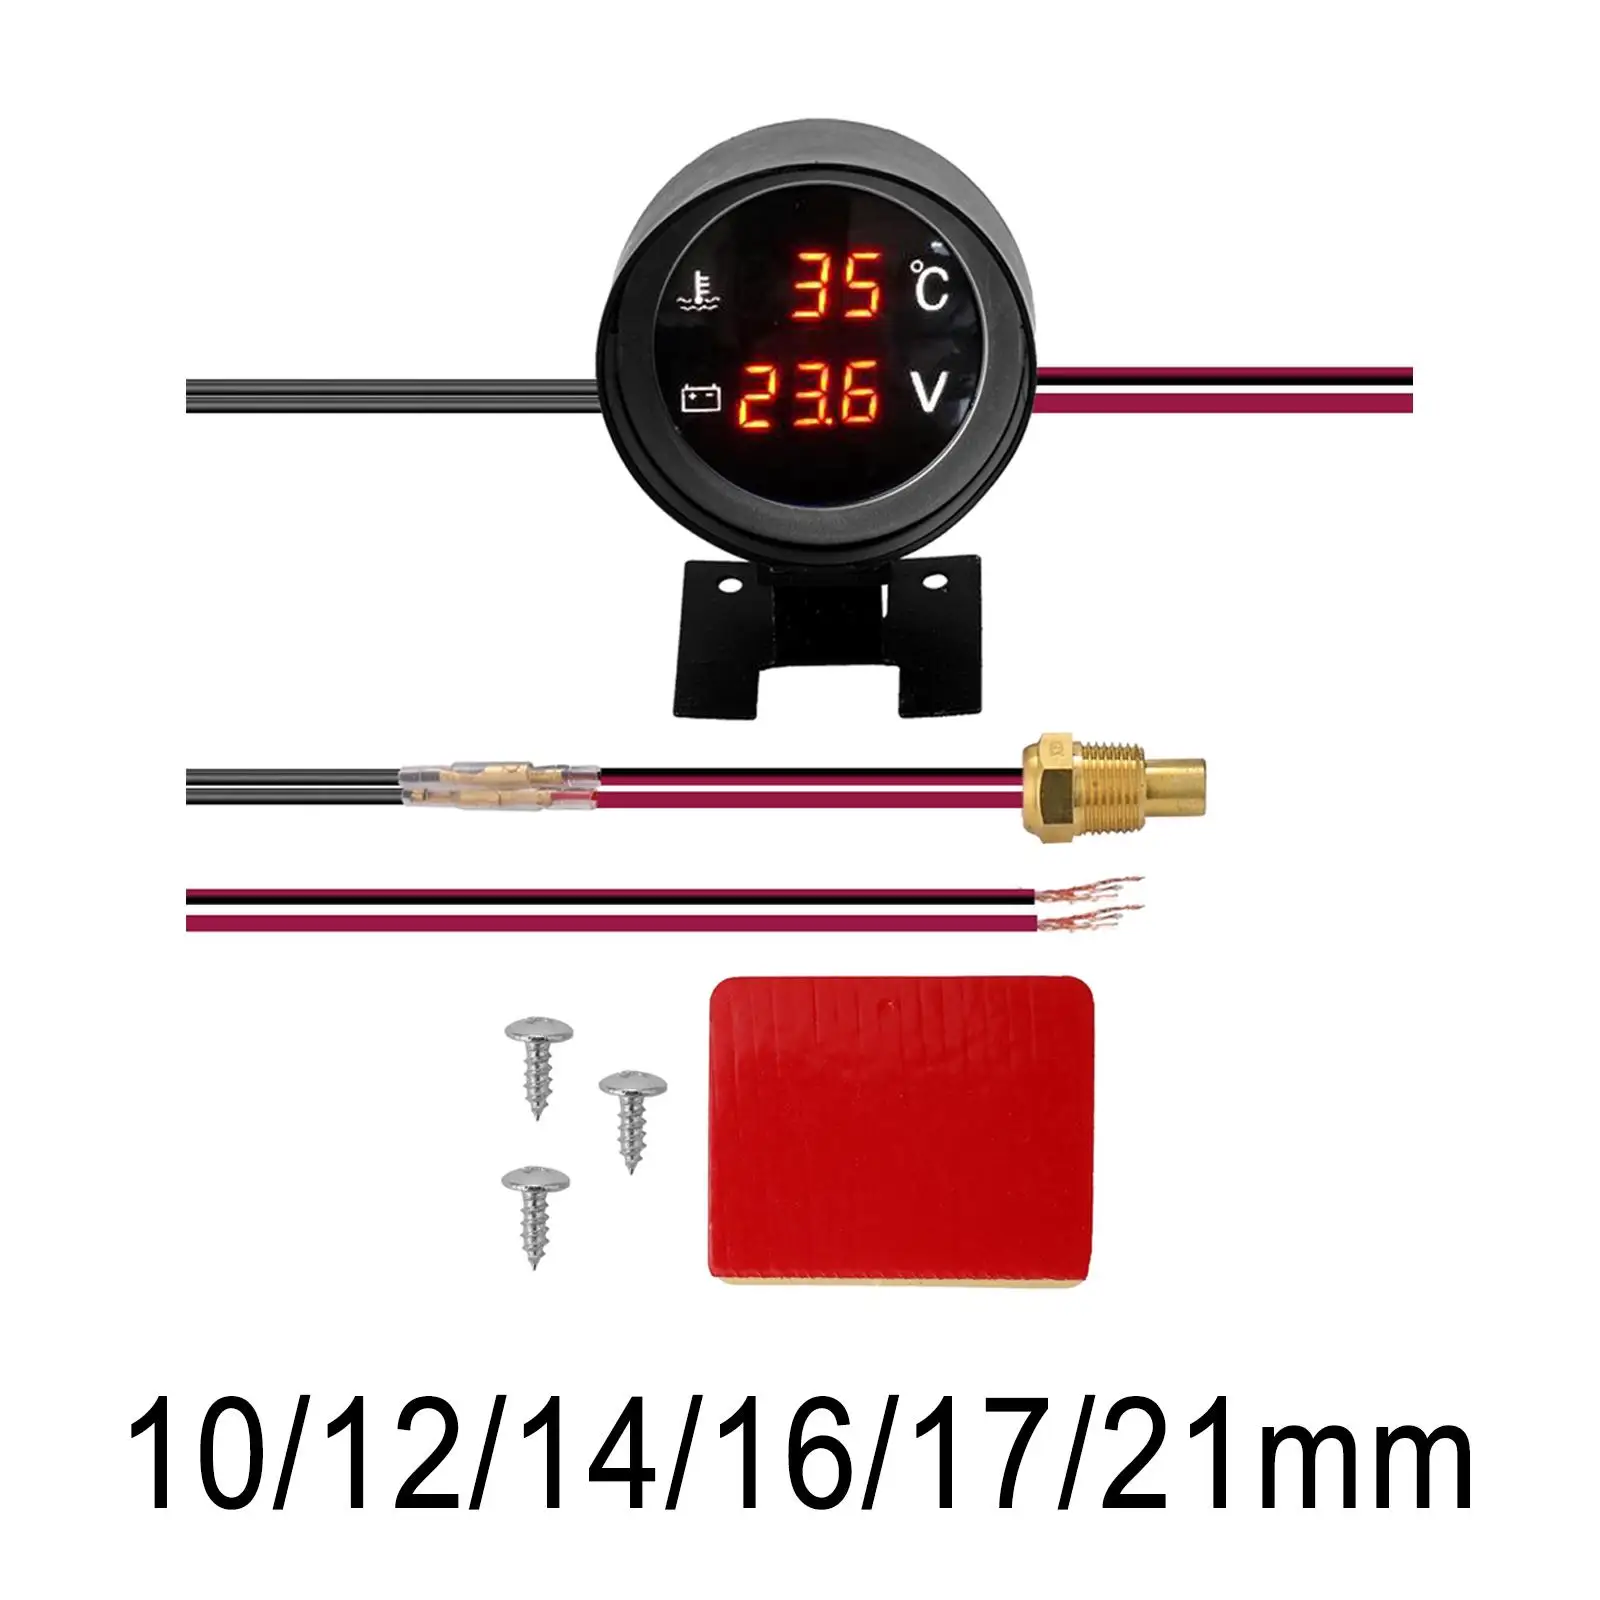 

Car Water Temp Gauge Voltmeter Replaces Universal 12V/24V High performance Parts Durable Premium 2 in 1 Vehicle Meter 10-21mm